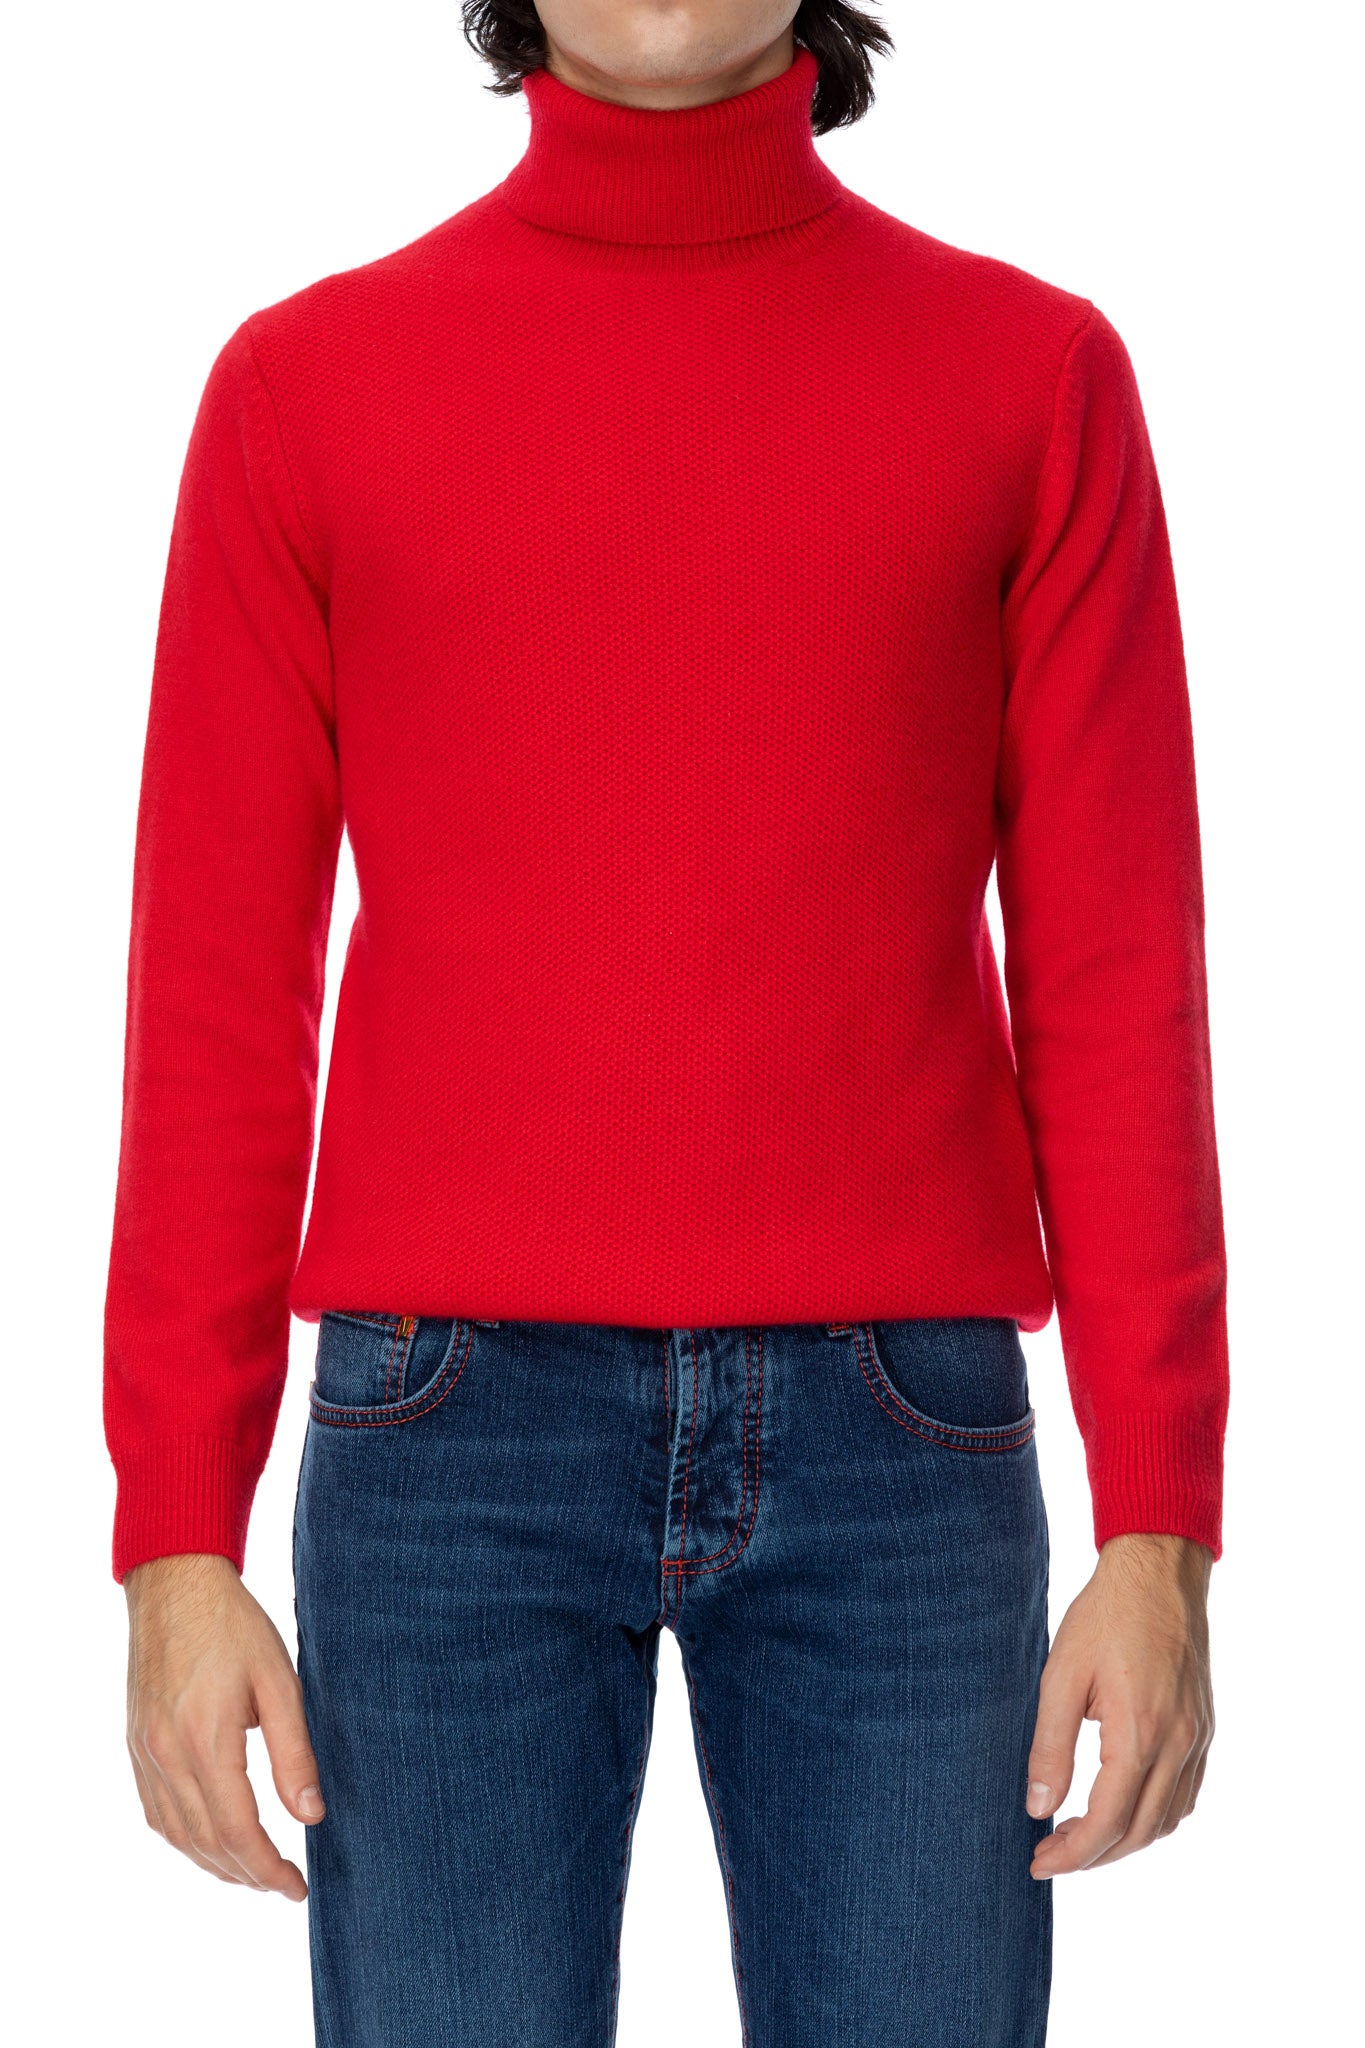 Red cashmere neck sweater